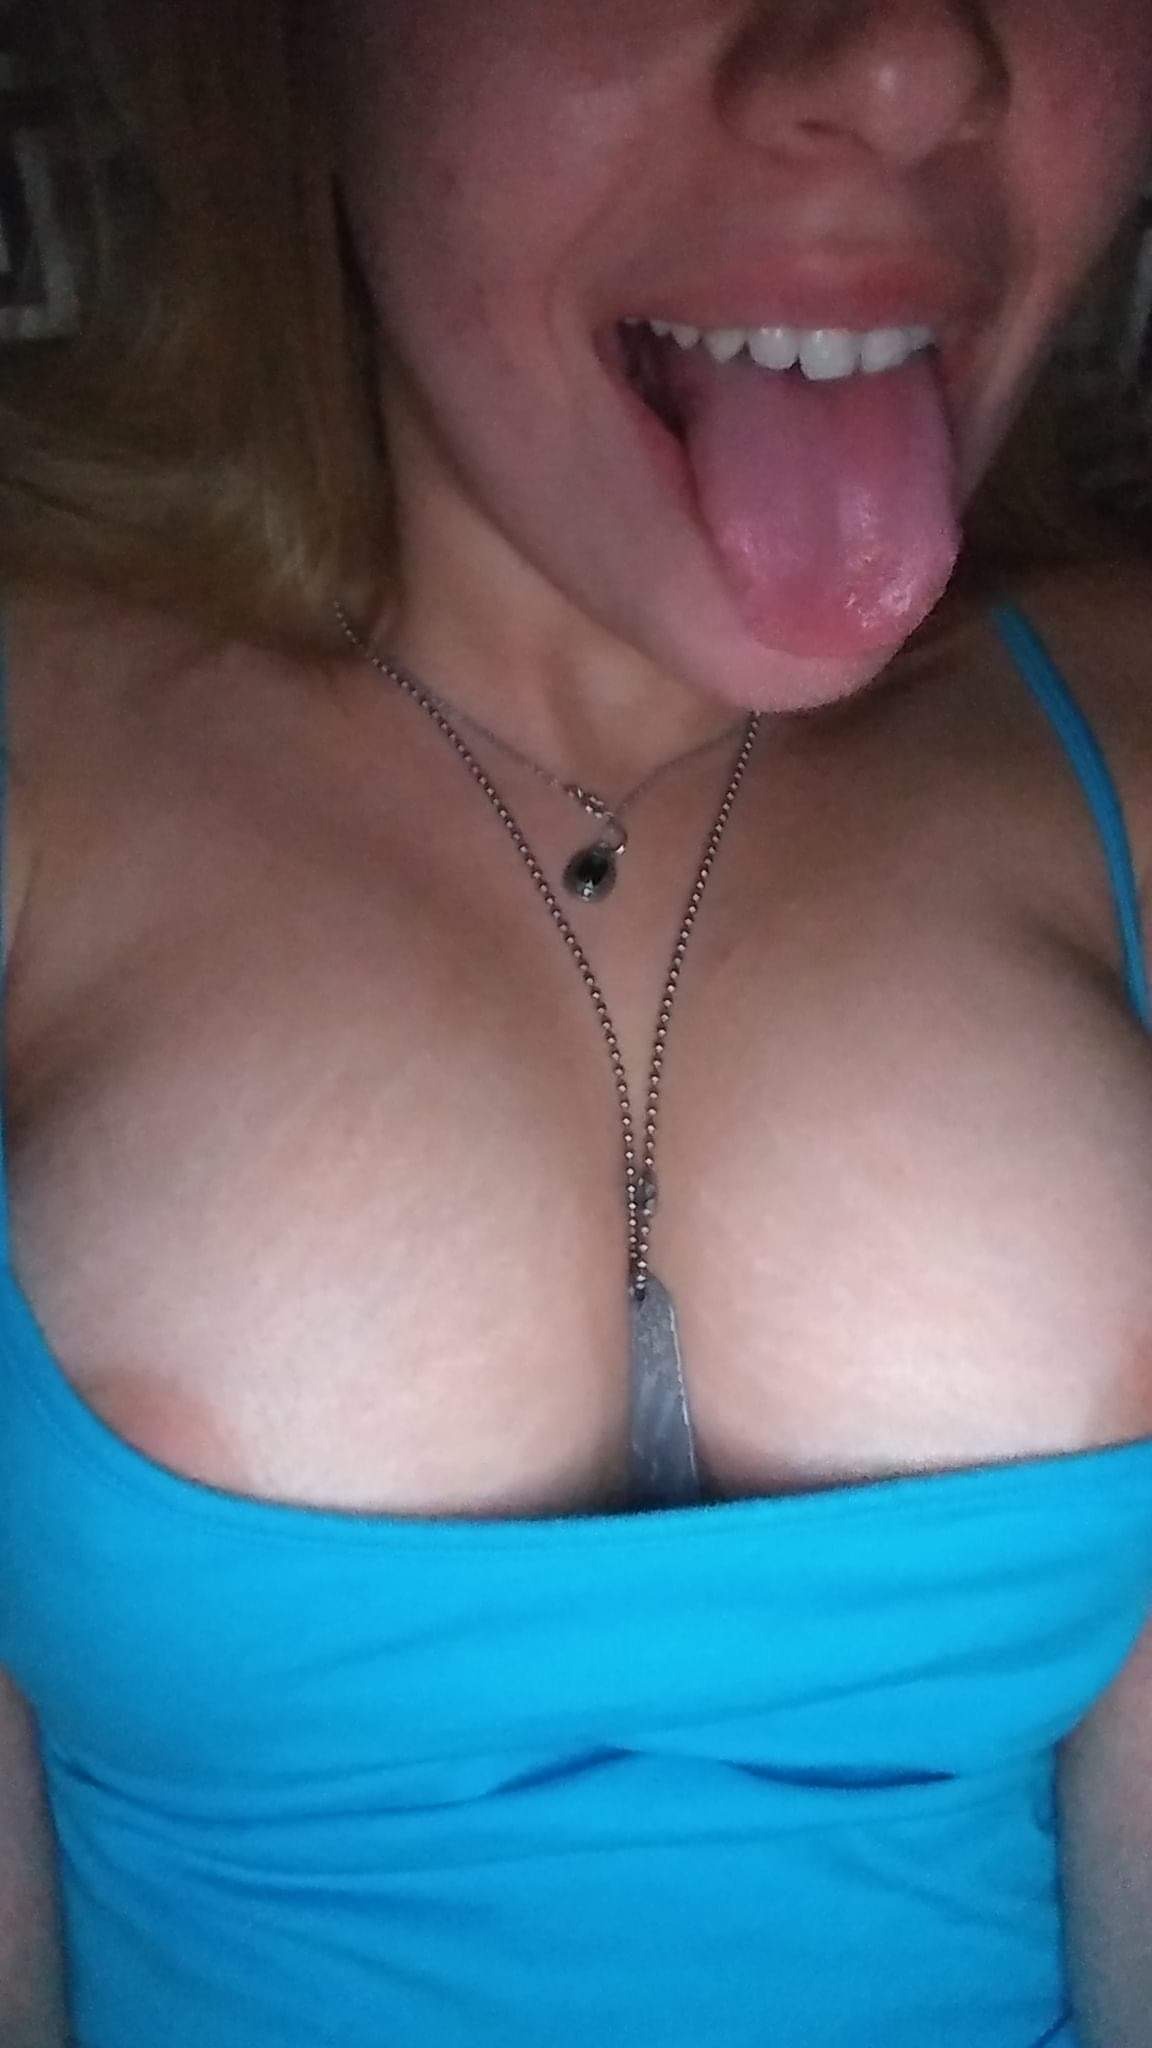 Sex blondebunny19-deactivated202102:I need more pictures